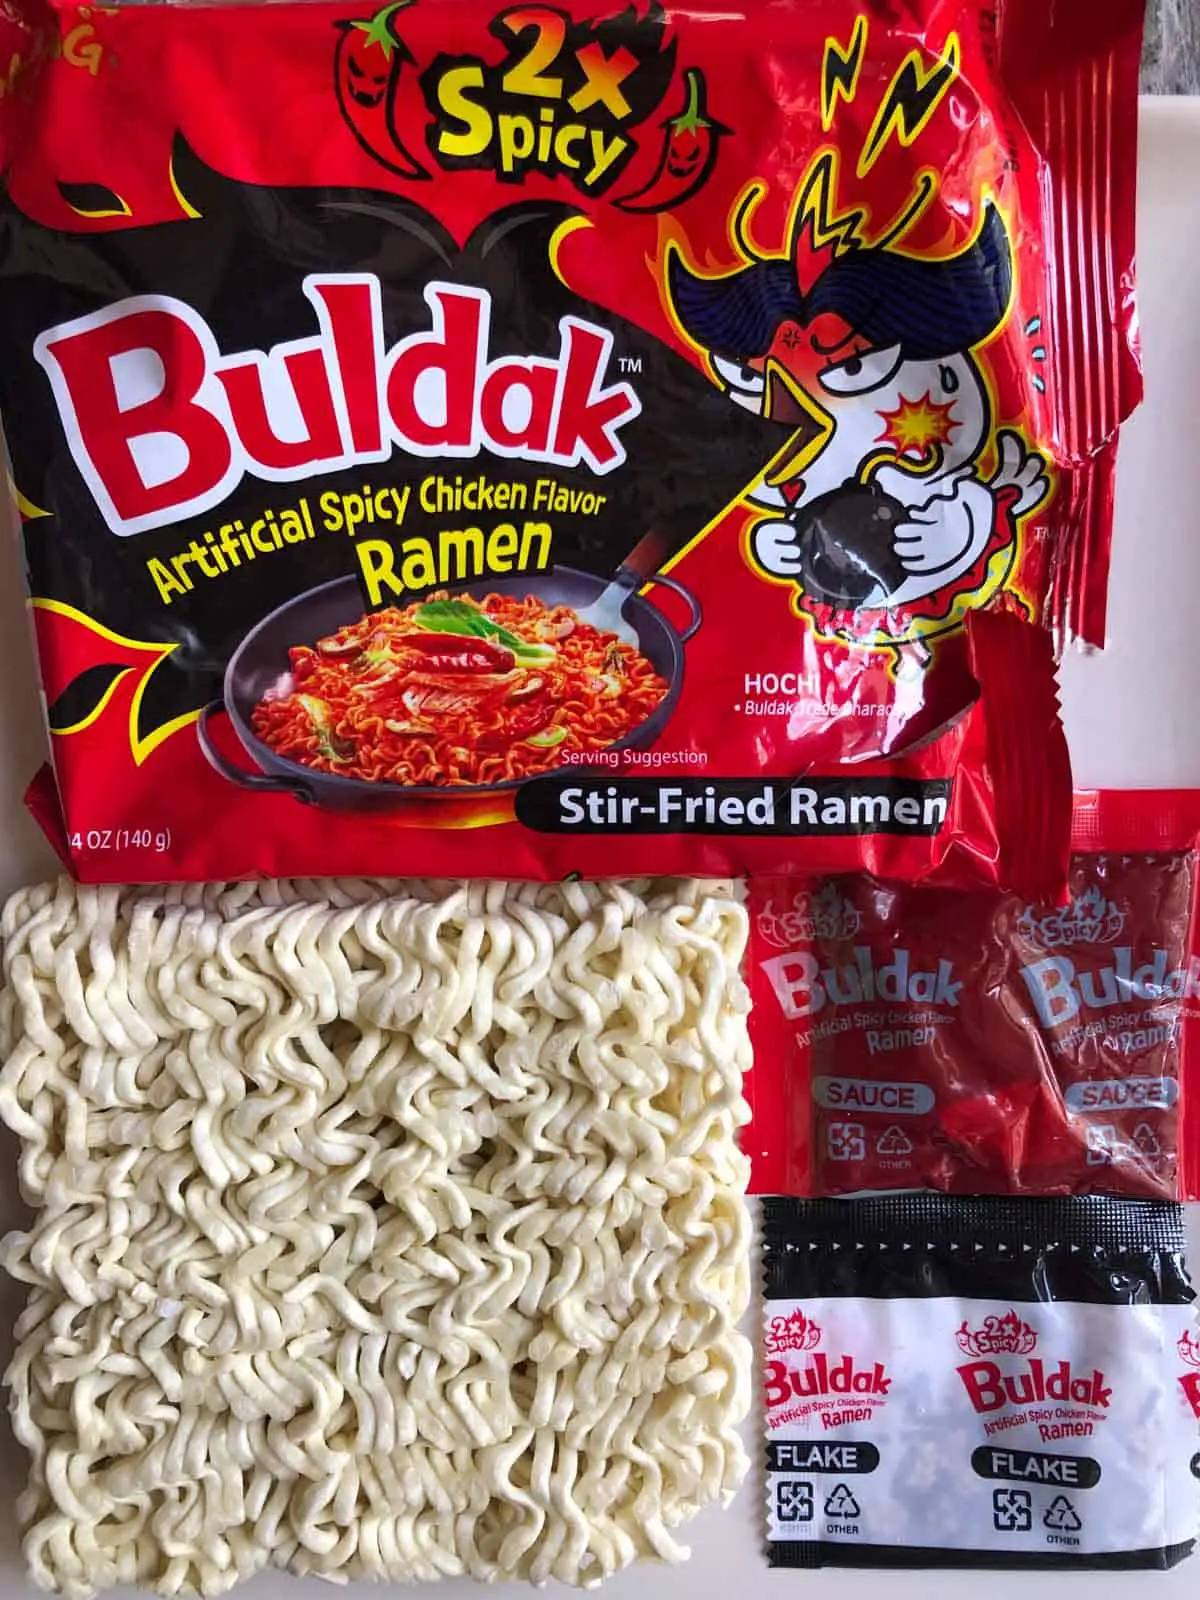 Packaging for Samyang Buldak 2x Spicy Ramen, the noodles that come in the packet, a packet of spicy sauce, and a packet of flake.